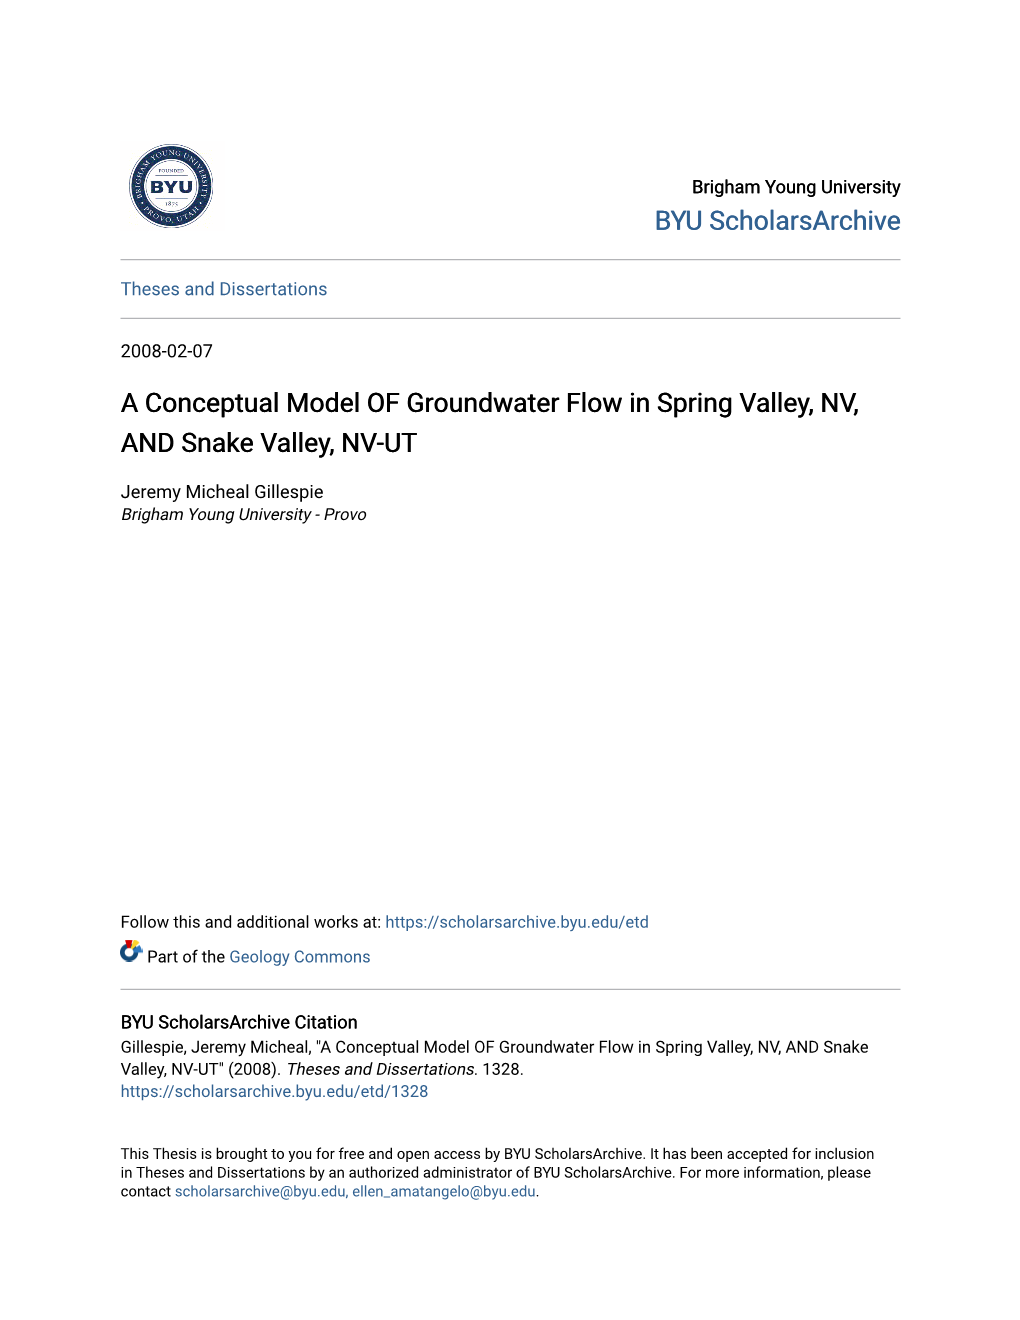 A Conceptual Model of Groundwater Flow in Spring Valley, NV, and Snake Valley, NV-UT